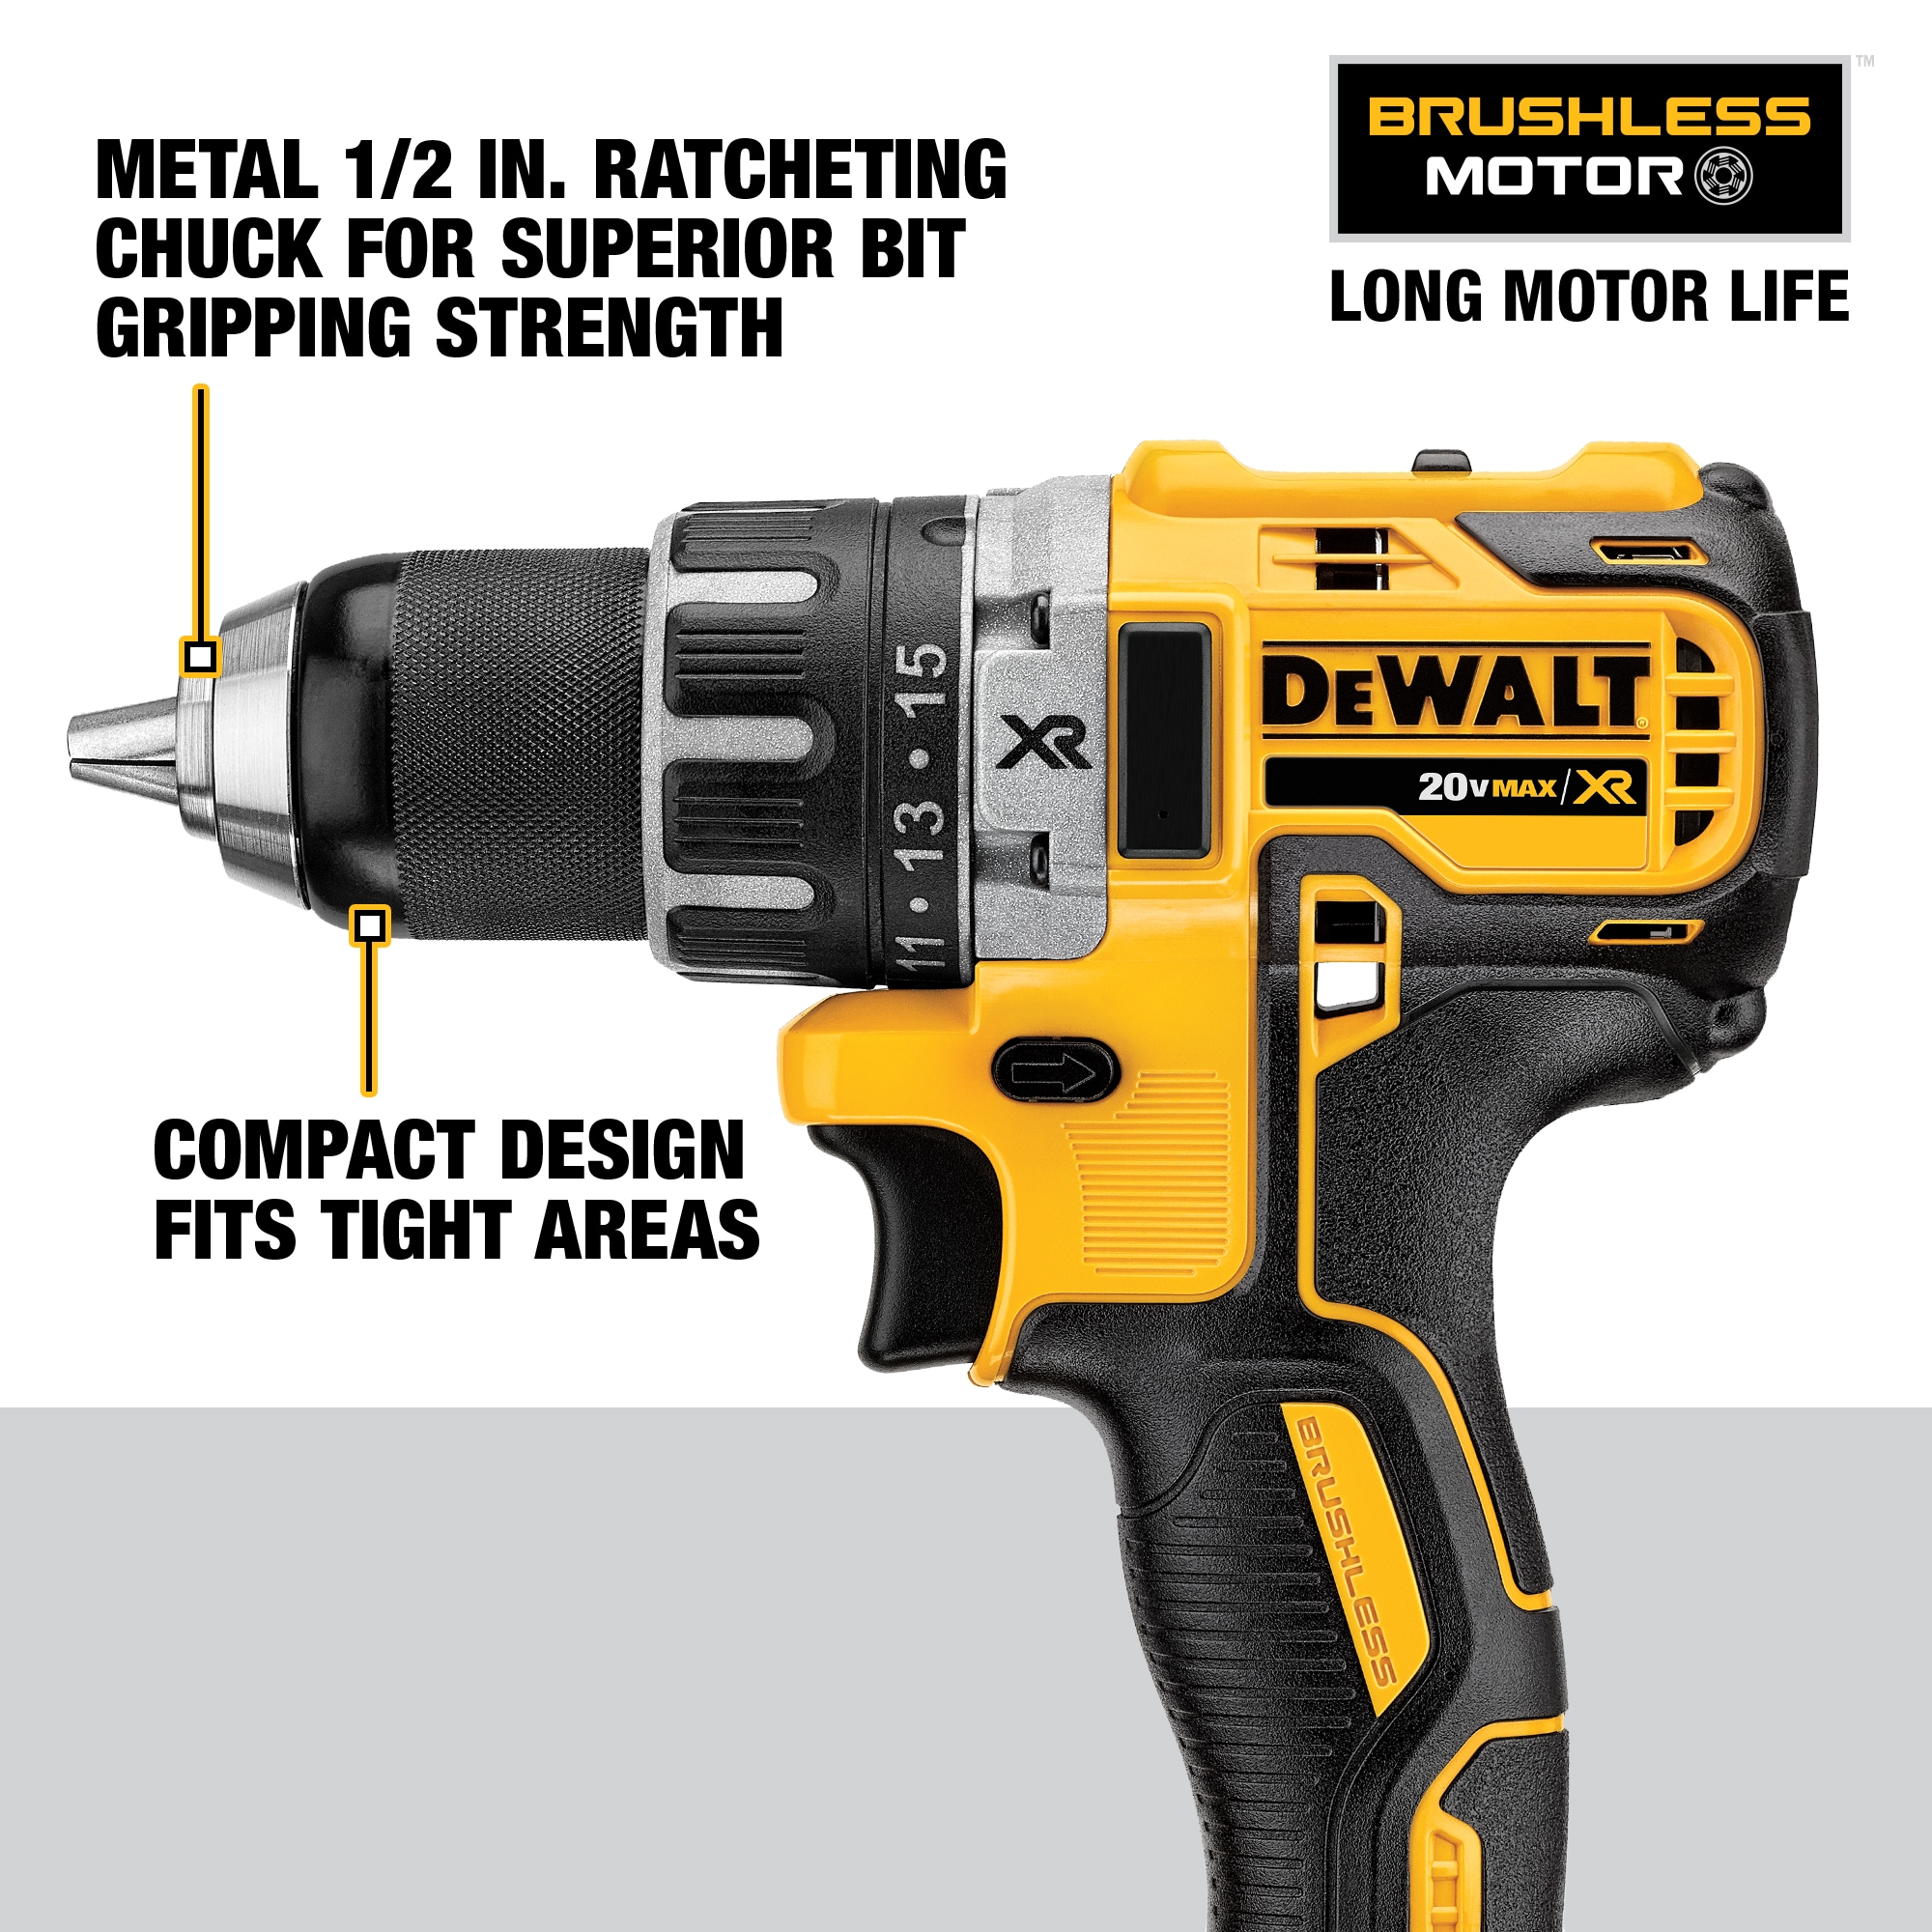 DEWALT XR 20-volt 1/2-in Drill (2 Li-ion Batteries Included and Charger Included) in department at Lowes.com